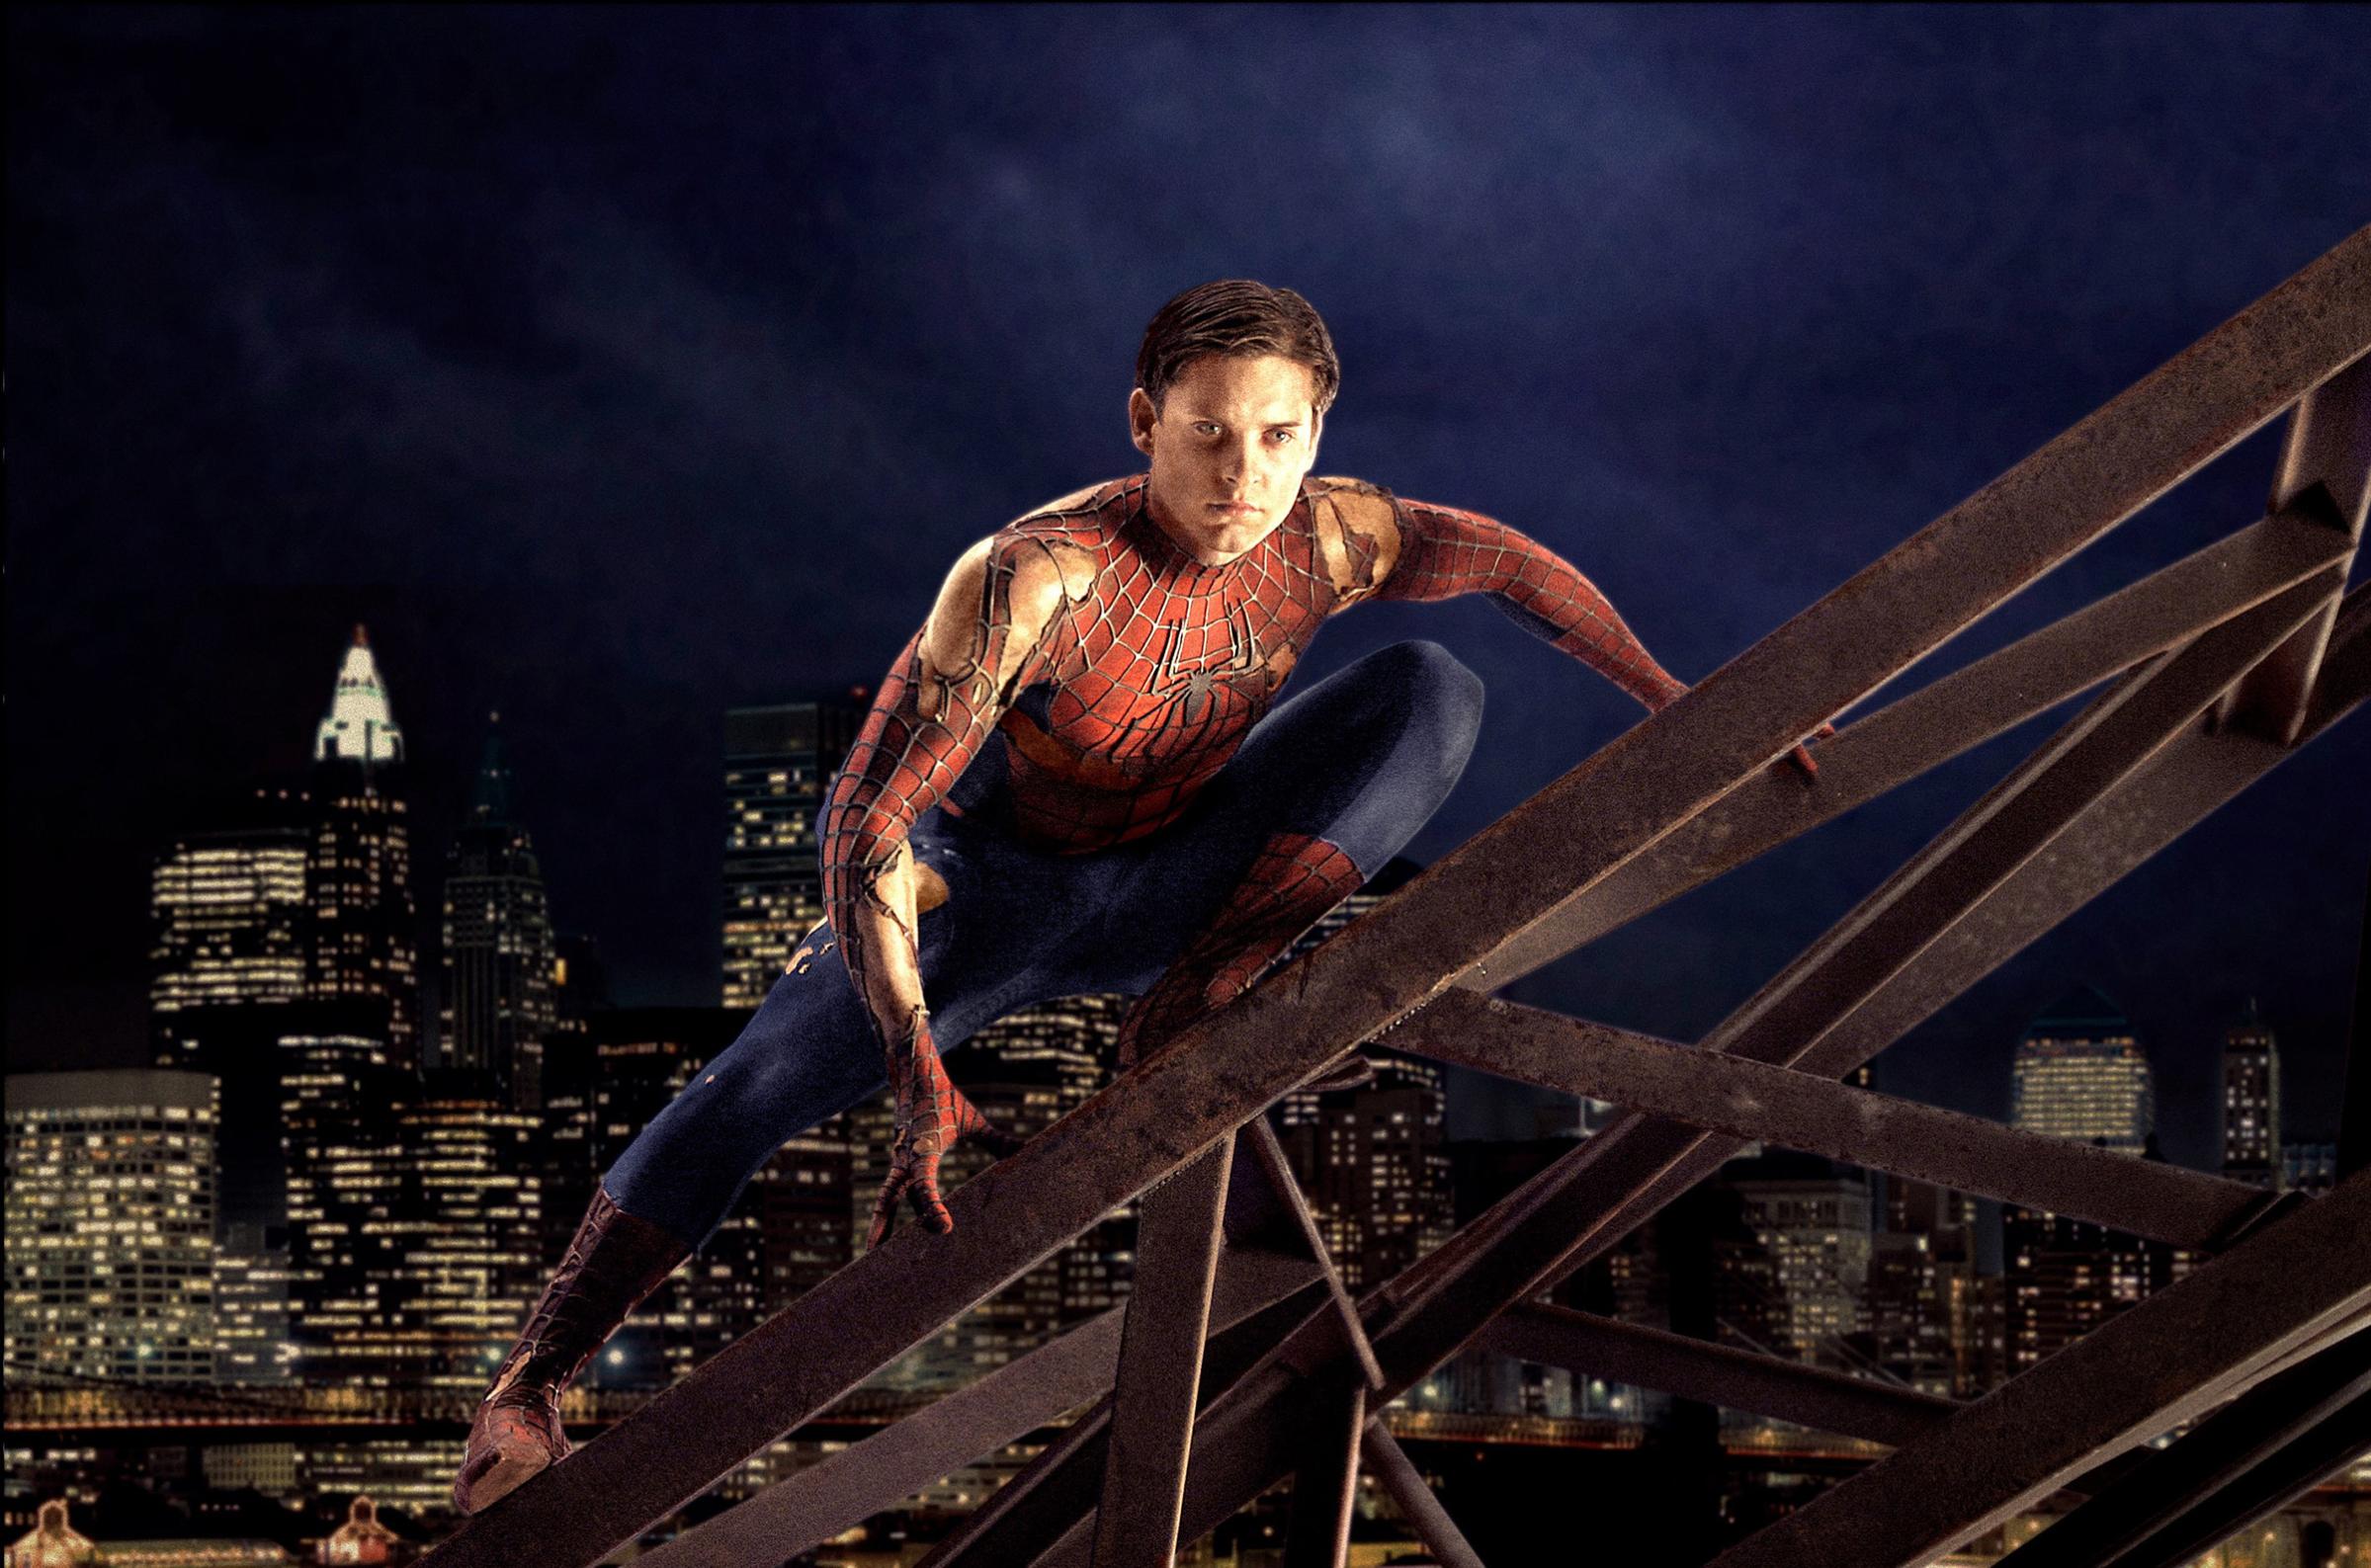 Spidey’s onscreen alter-ego has always been Peter Parker. Sixteen years after the original film, Sony looks to modernize the character. From left: Tobey Maguire, Andrew Garfield and Tom Holland.